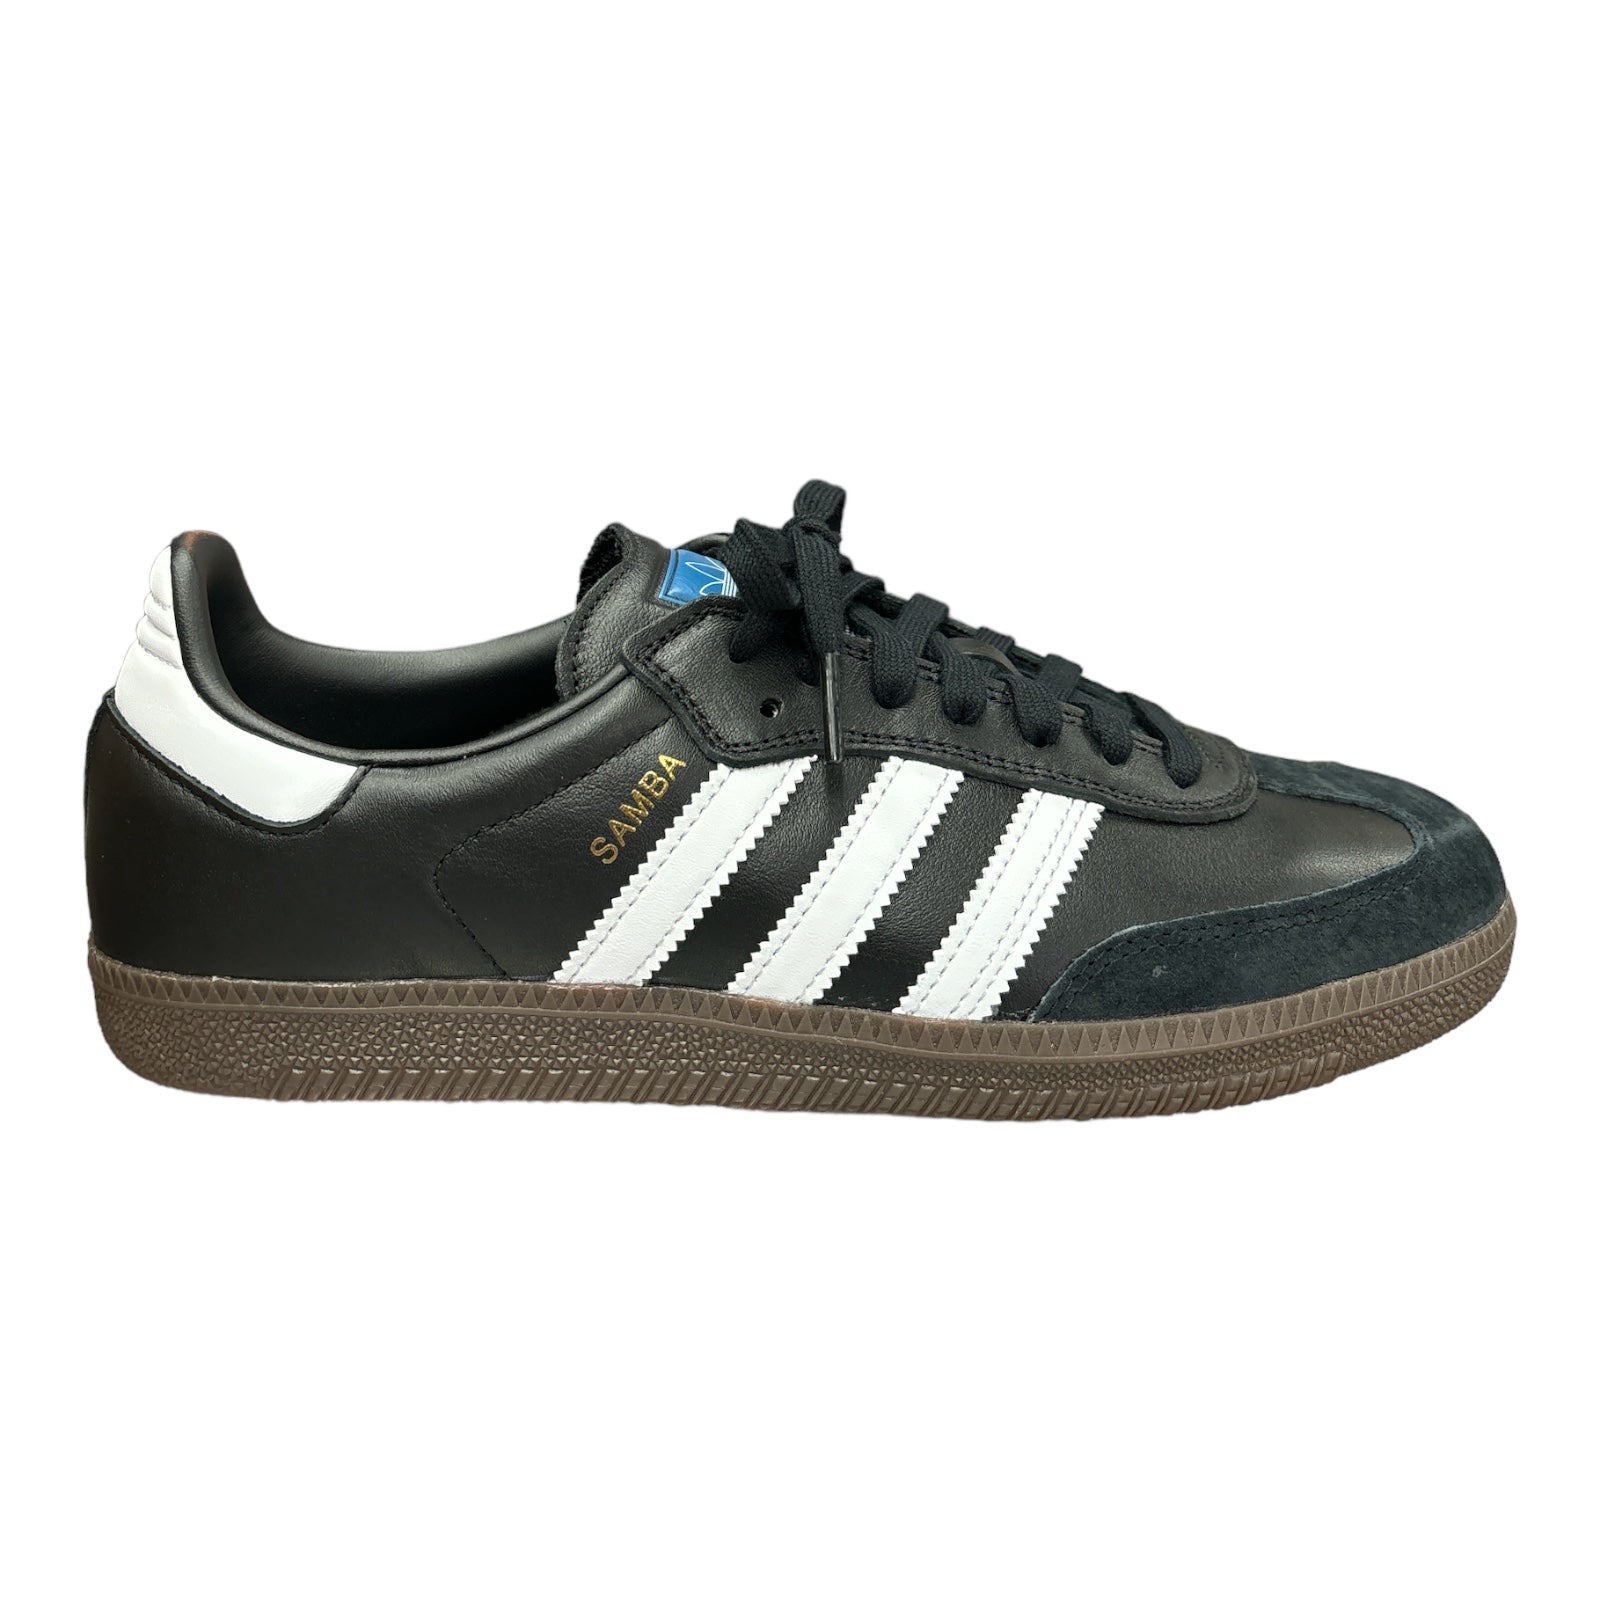 Adidas Samba in Black Leather with White Stripes & Gum Outsole.